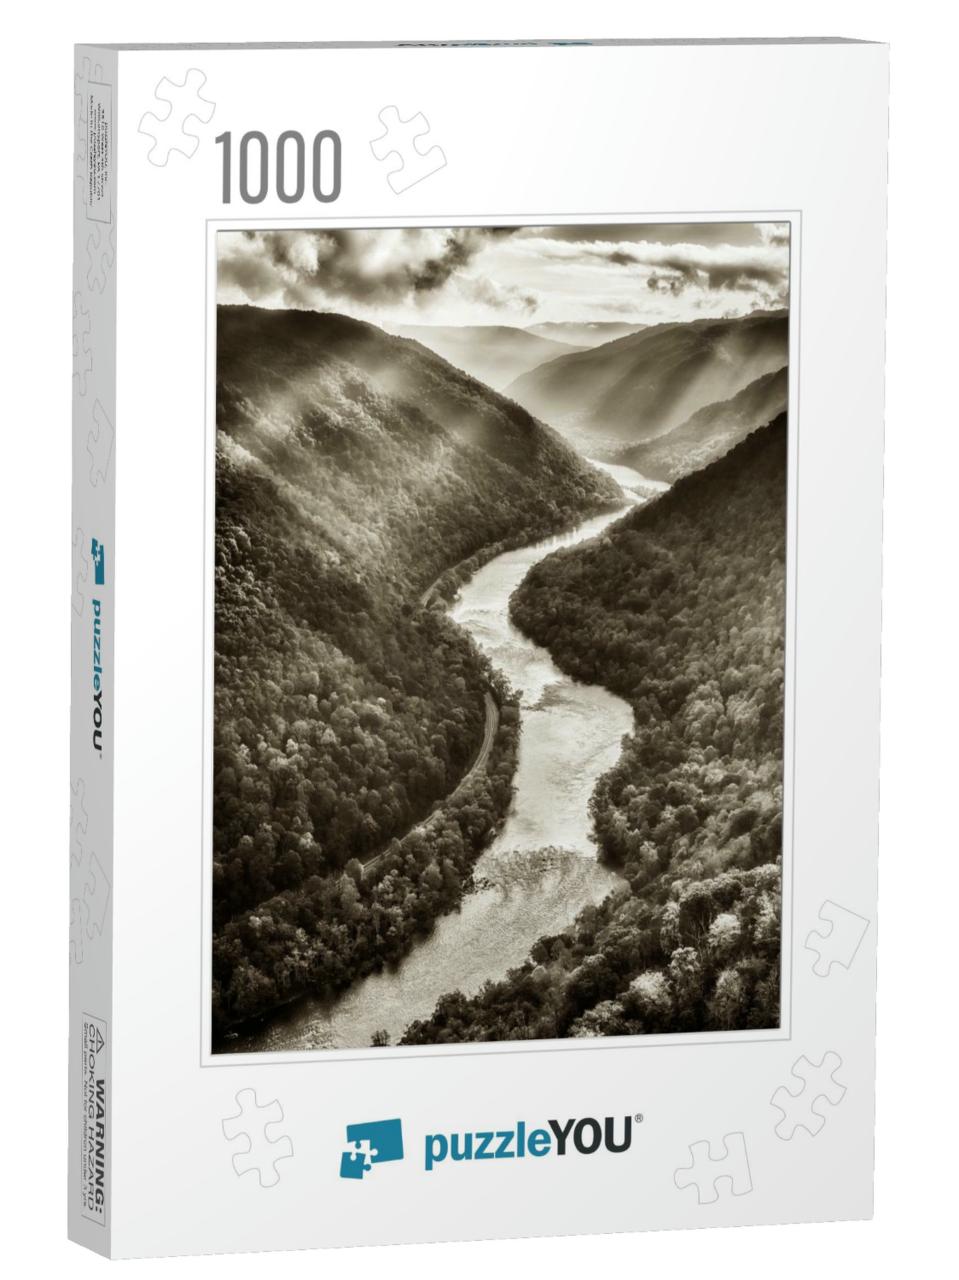 Grandview, Main Overlook, New River Gorge National Park &... Jigsaw Puzzle with 1000 pieces